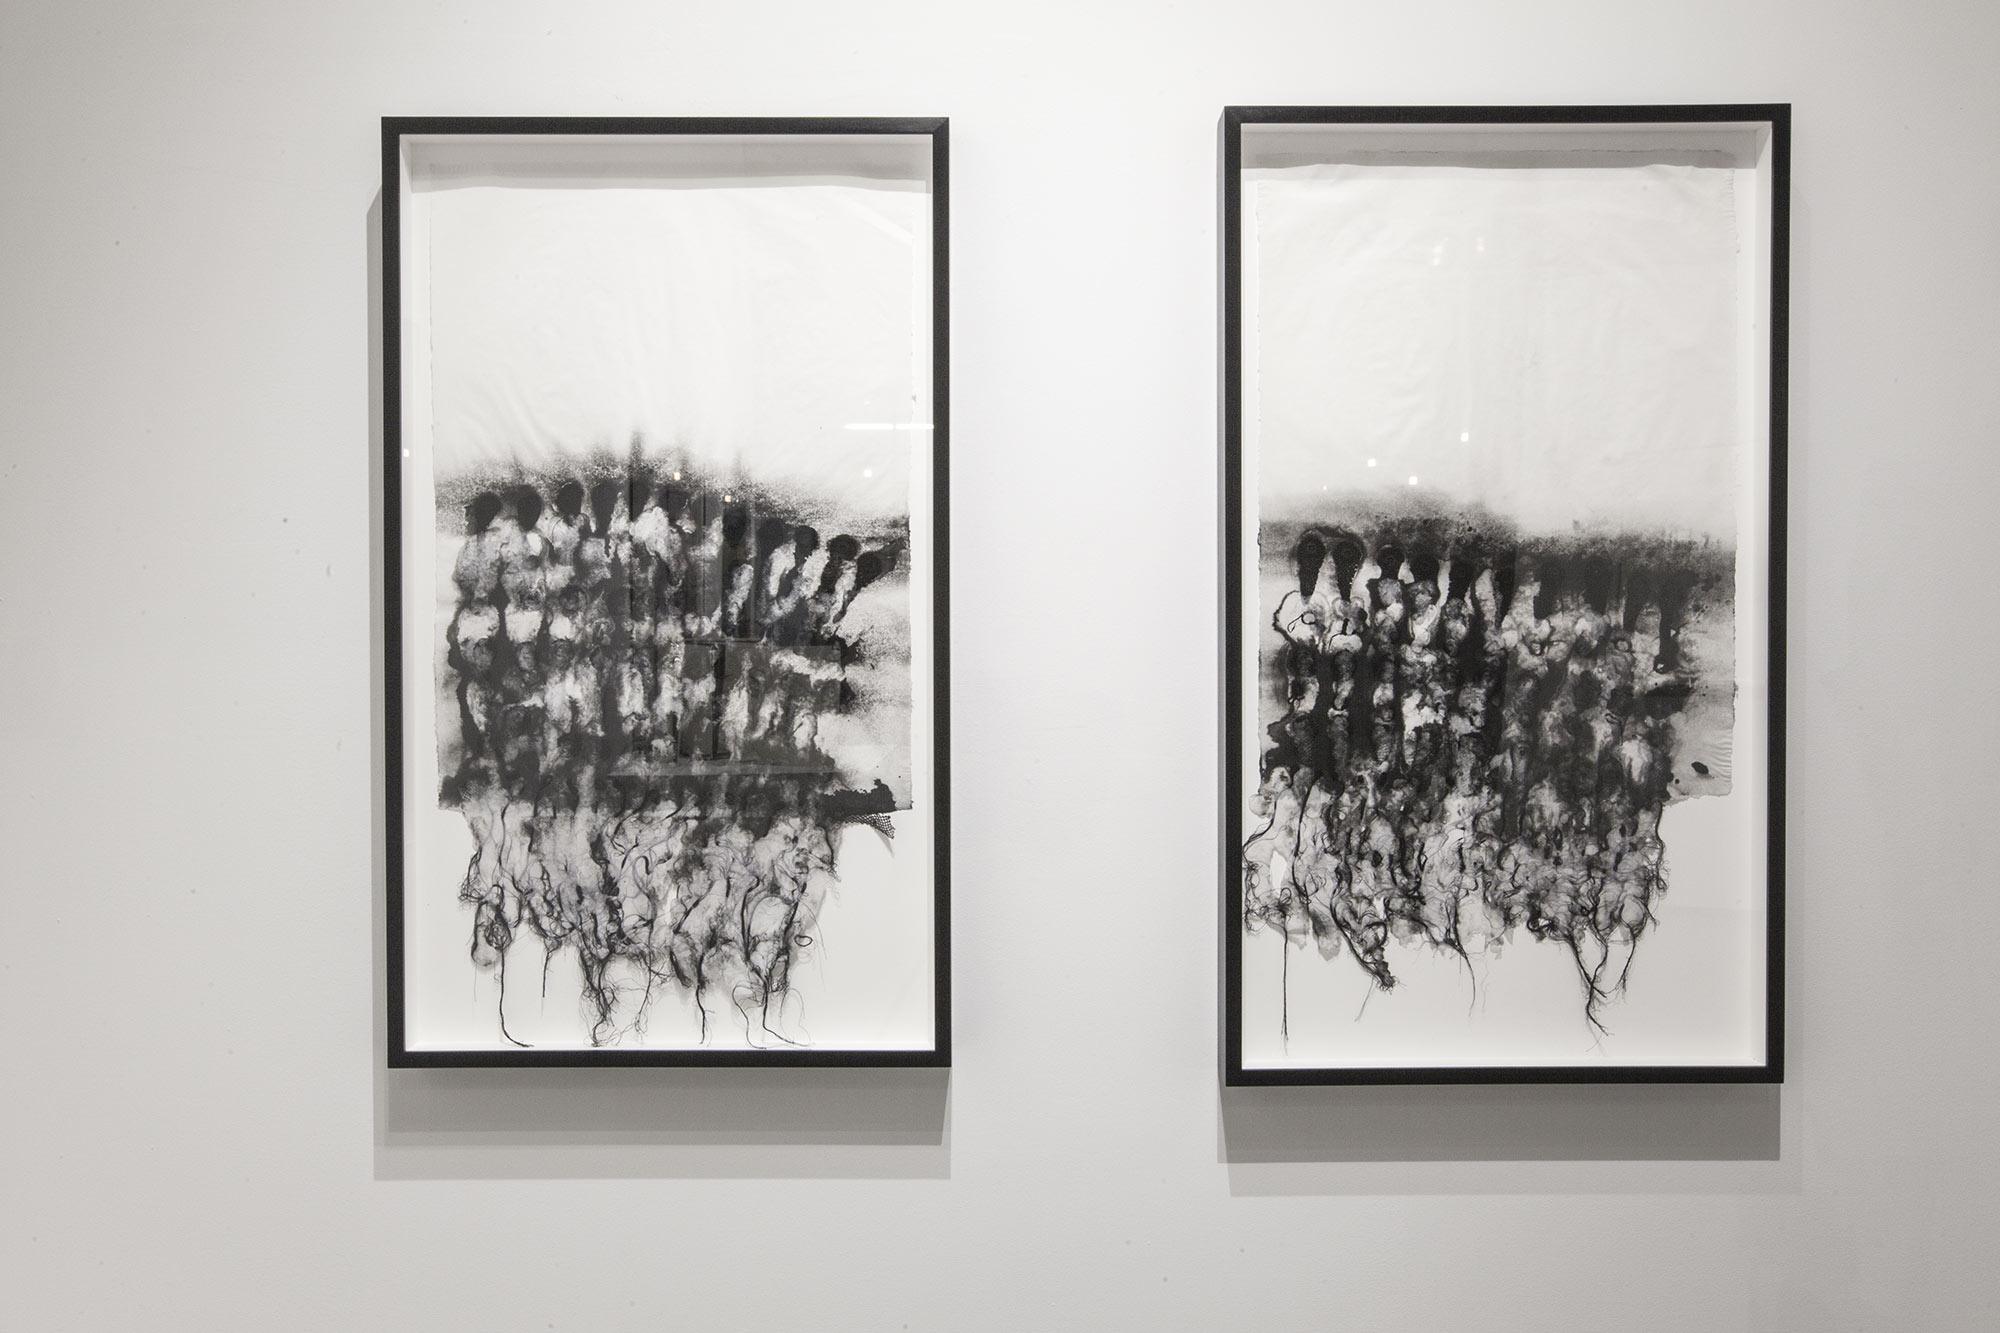 Two abstract paintings in black and white hung beside one another